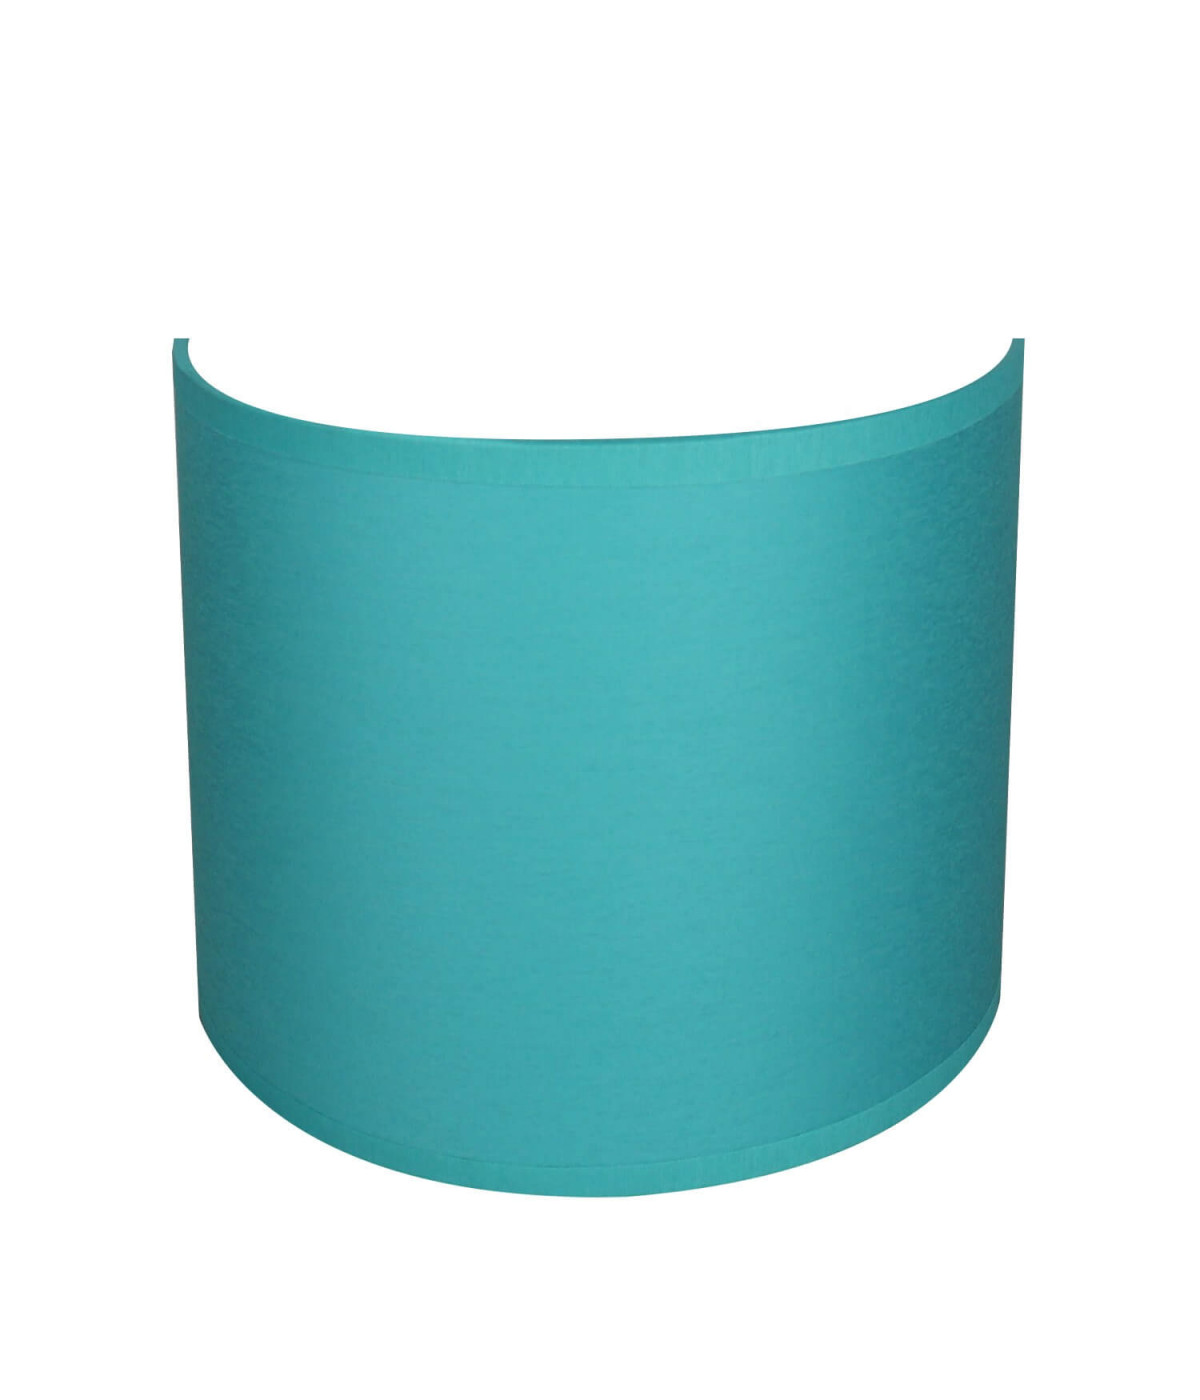 turquoise blue round wall light